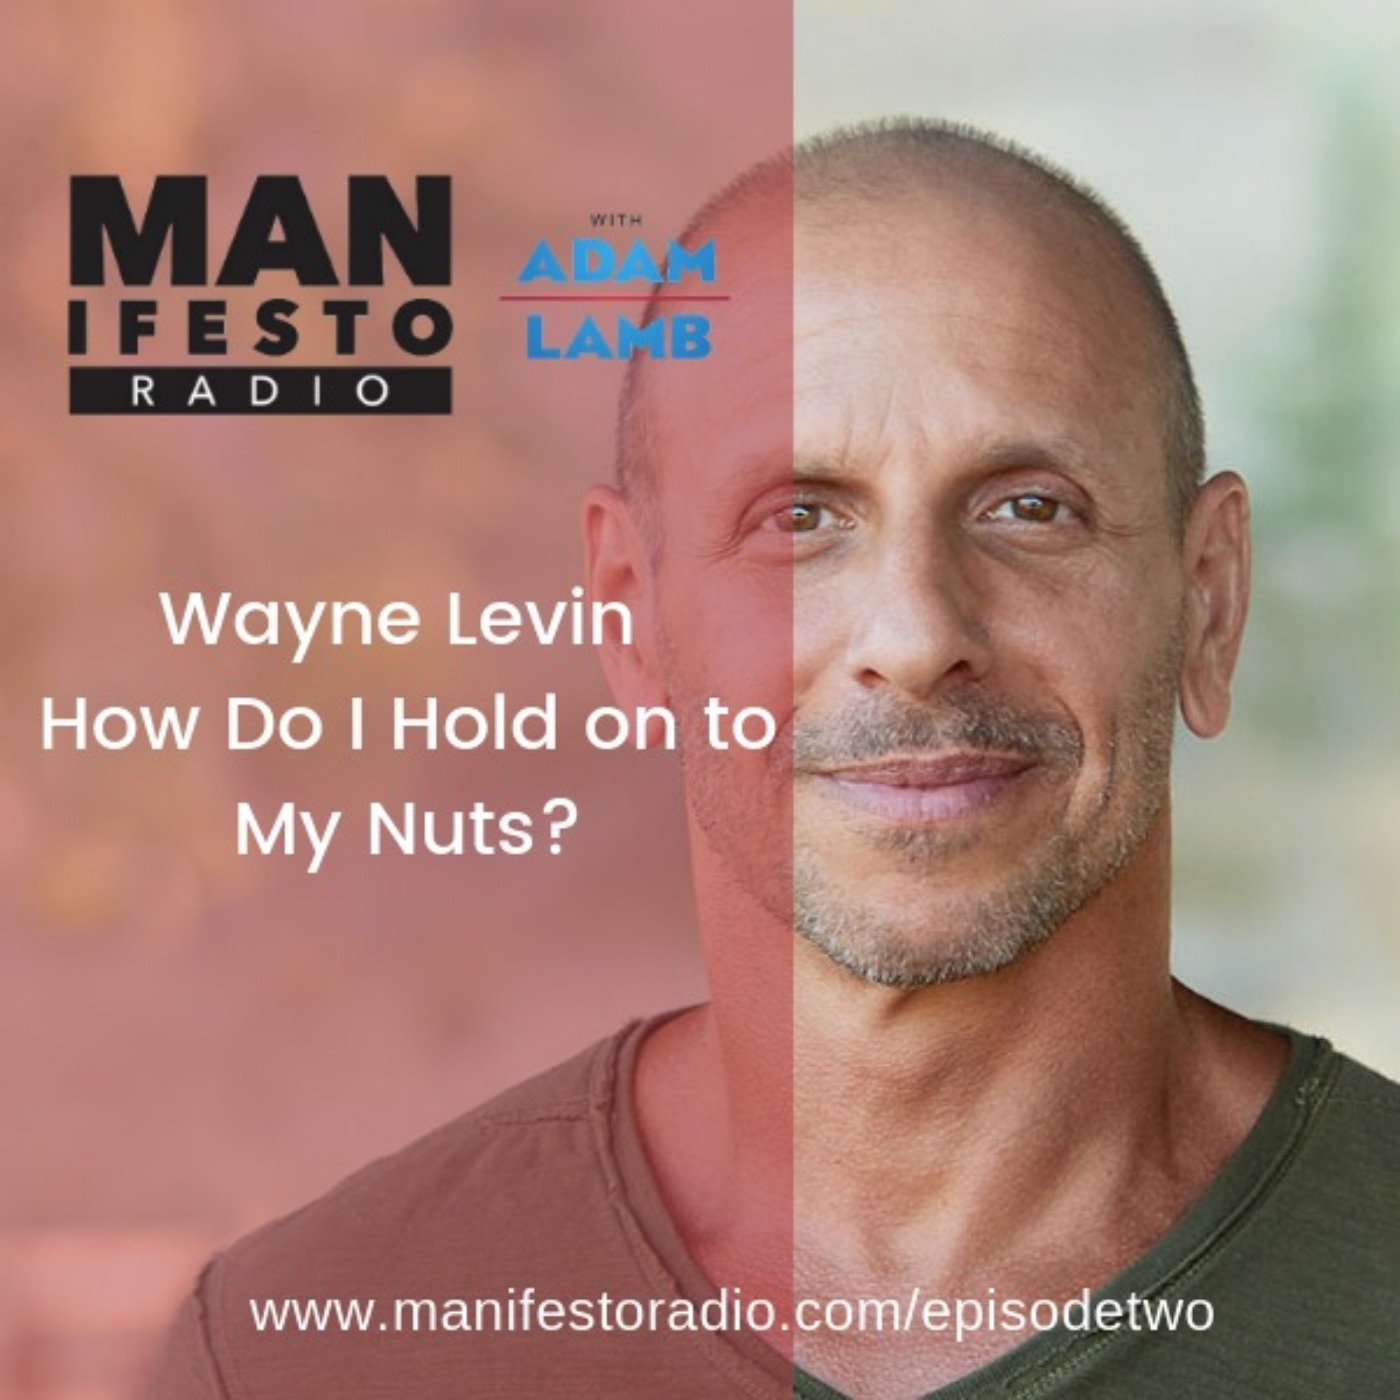 Wayne Levin | How Do I Hold On to My Nuts?